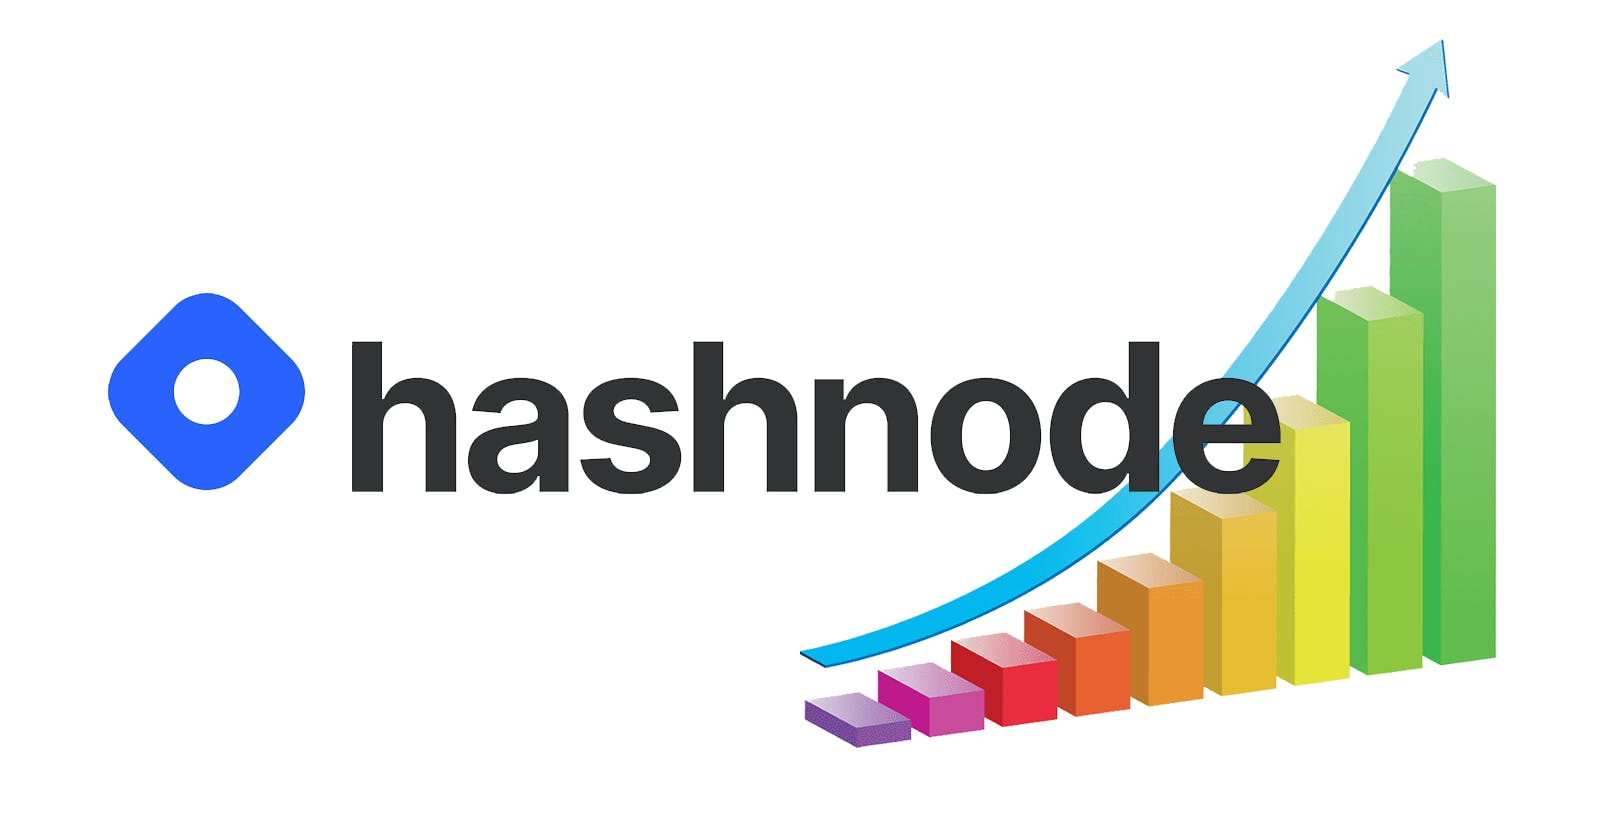 How did Hashnode help my project get traction?